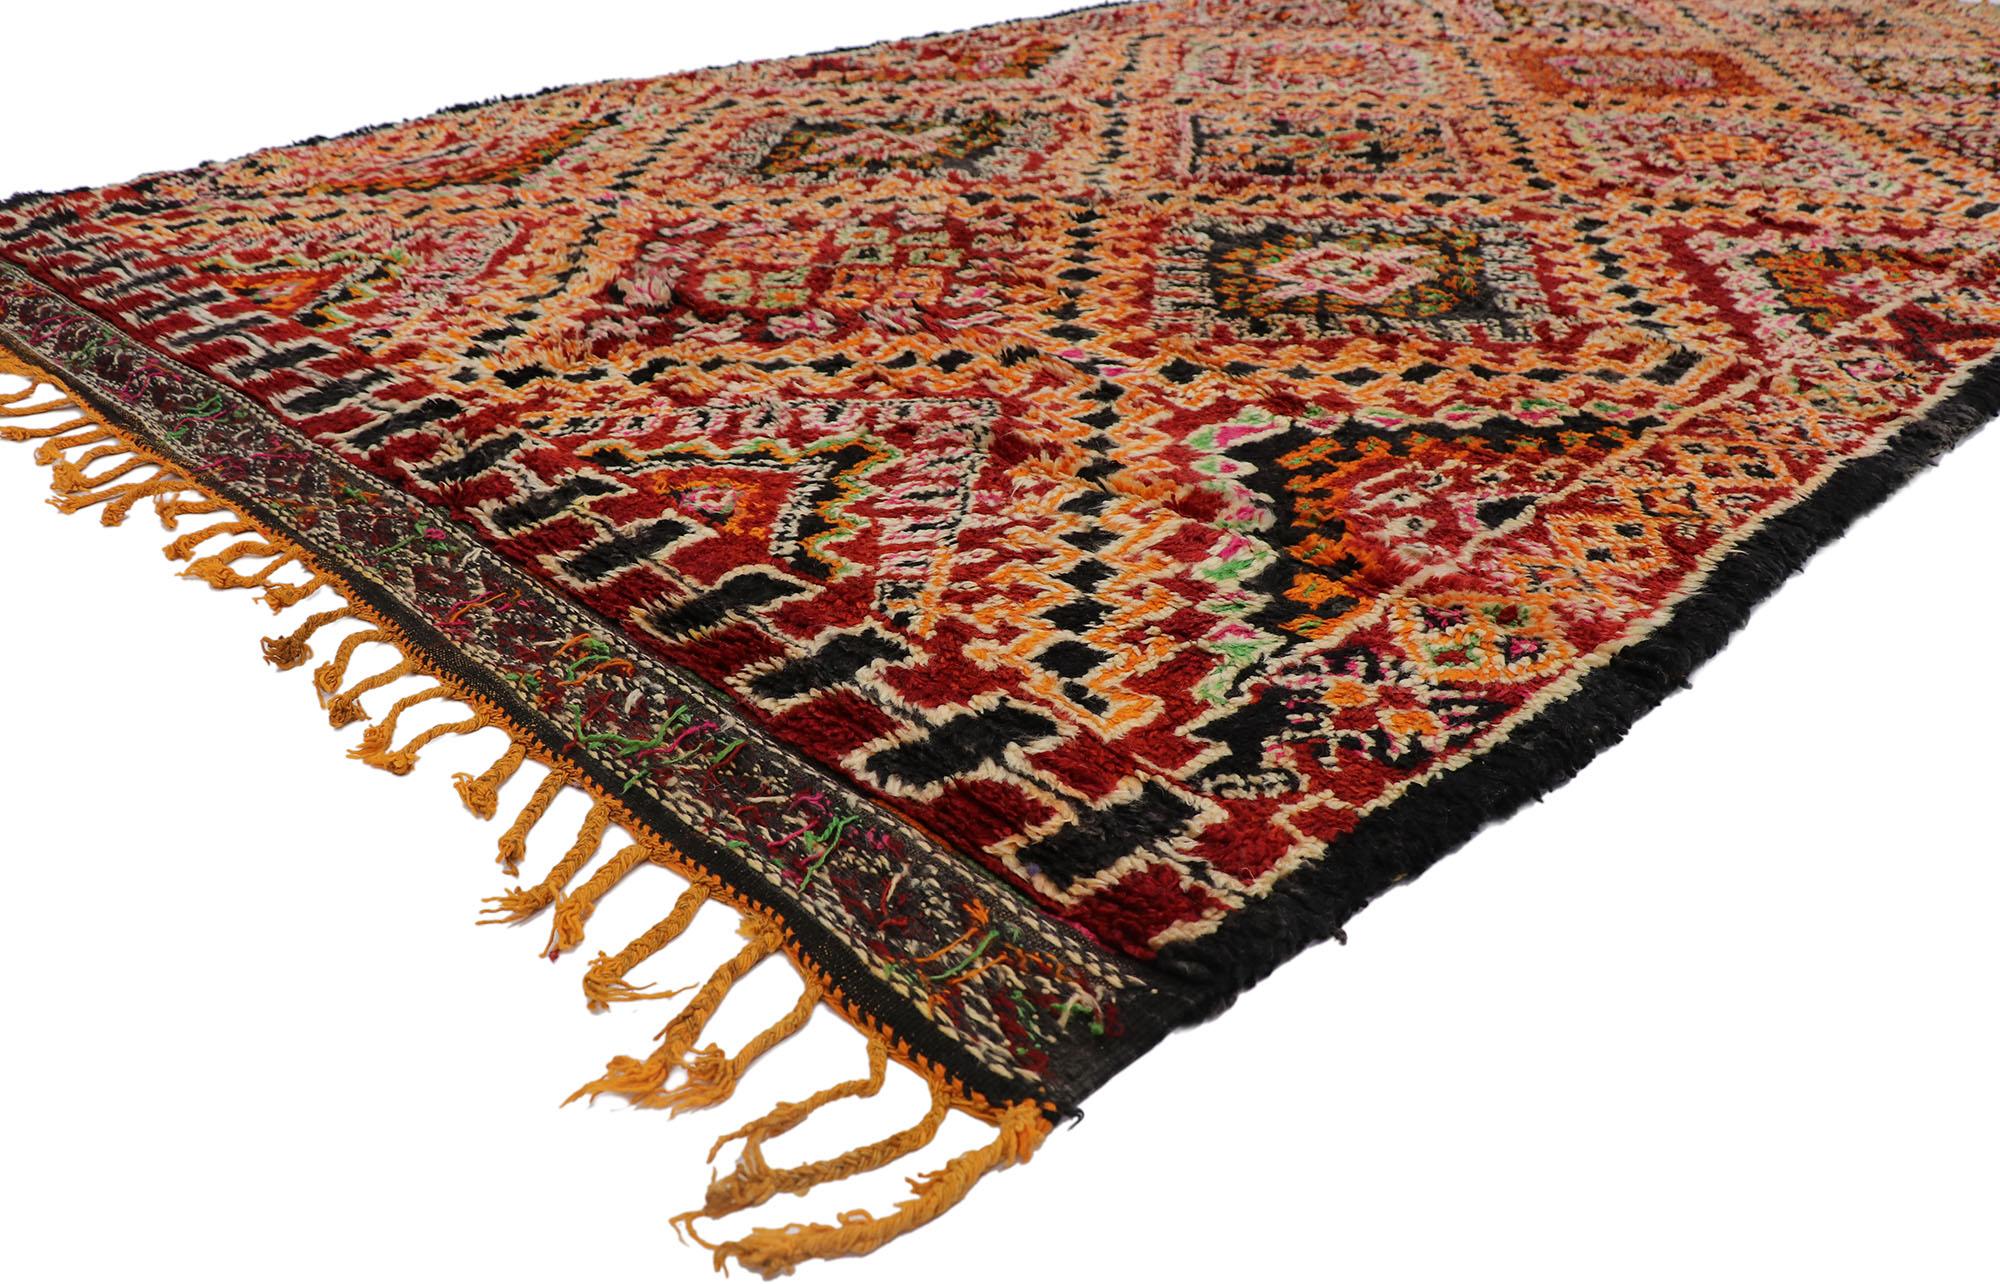 21226, vintage Berber Beni M'Guild Moroccan rug with Tribal style. Showcasing a bold expressive design, incredible detail and texture, this hand knotted wool vintage Berber Beni M'Guild Moroccan rug is a captivating vision of woven beauty. The